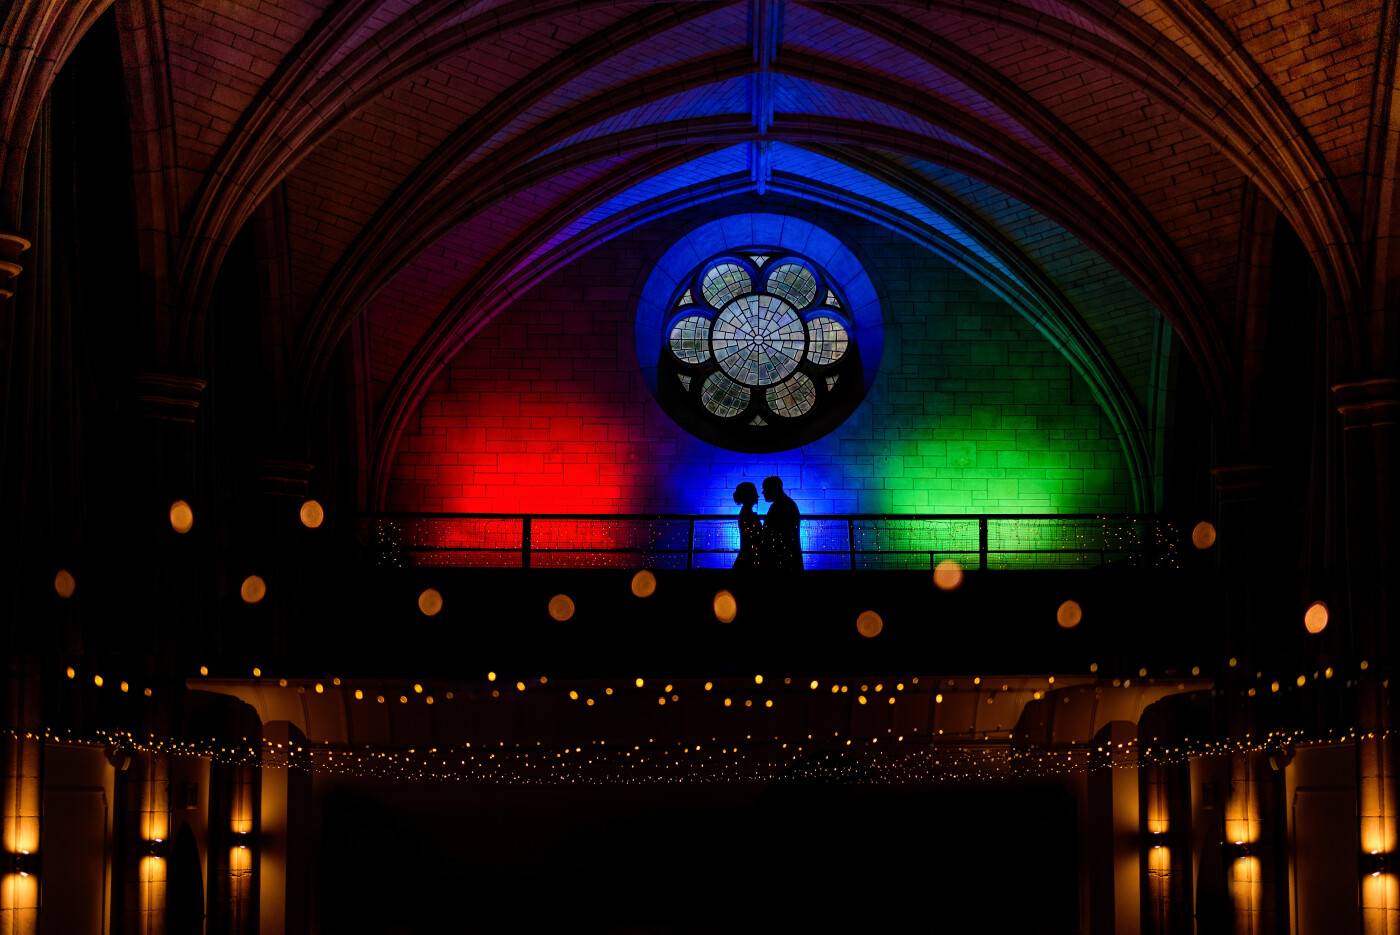 To finish the wedding off, the balcony in the Great Hall is a cool place to create something different. Having photographed quite a few couples on the balcony I like to keep the photographs unique to them and not copy previous photos from other weddings.  One of my previous balcony image which has won an international award was in black and white so this time I really wanted to add a splash of colour. 